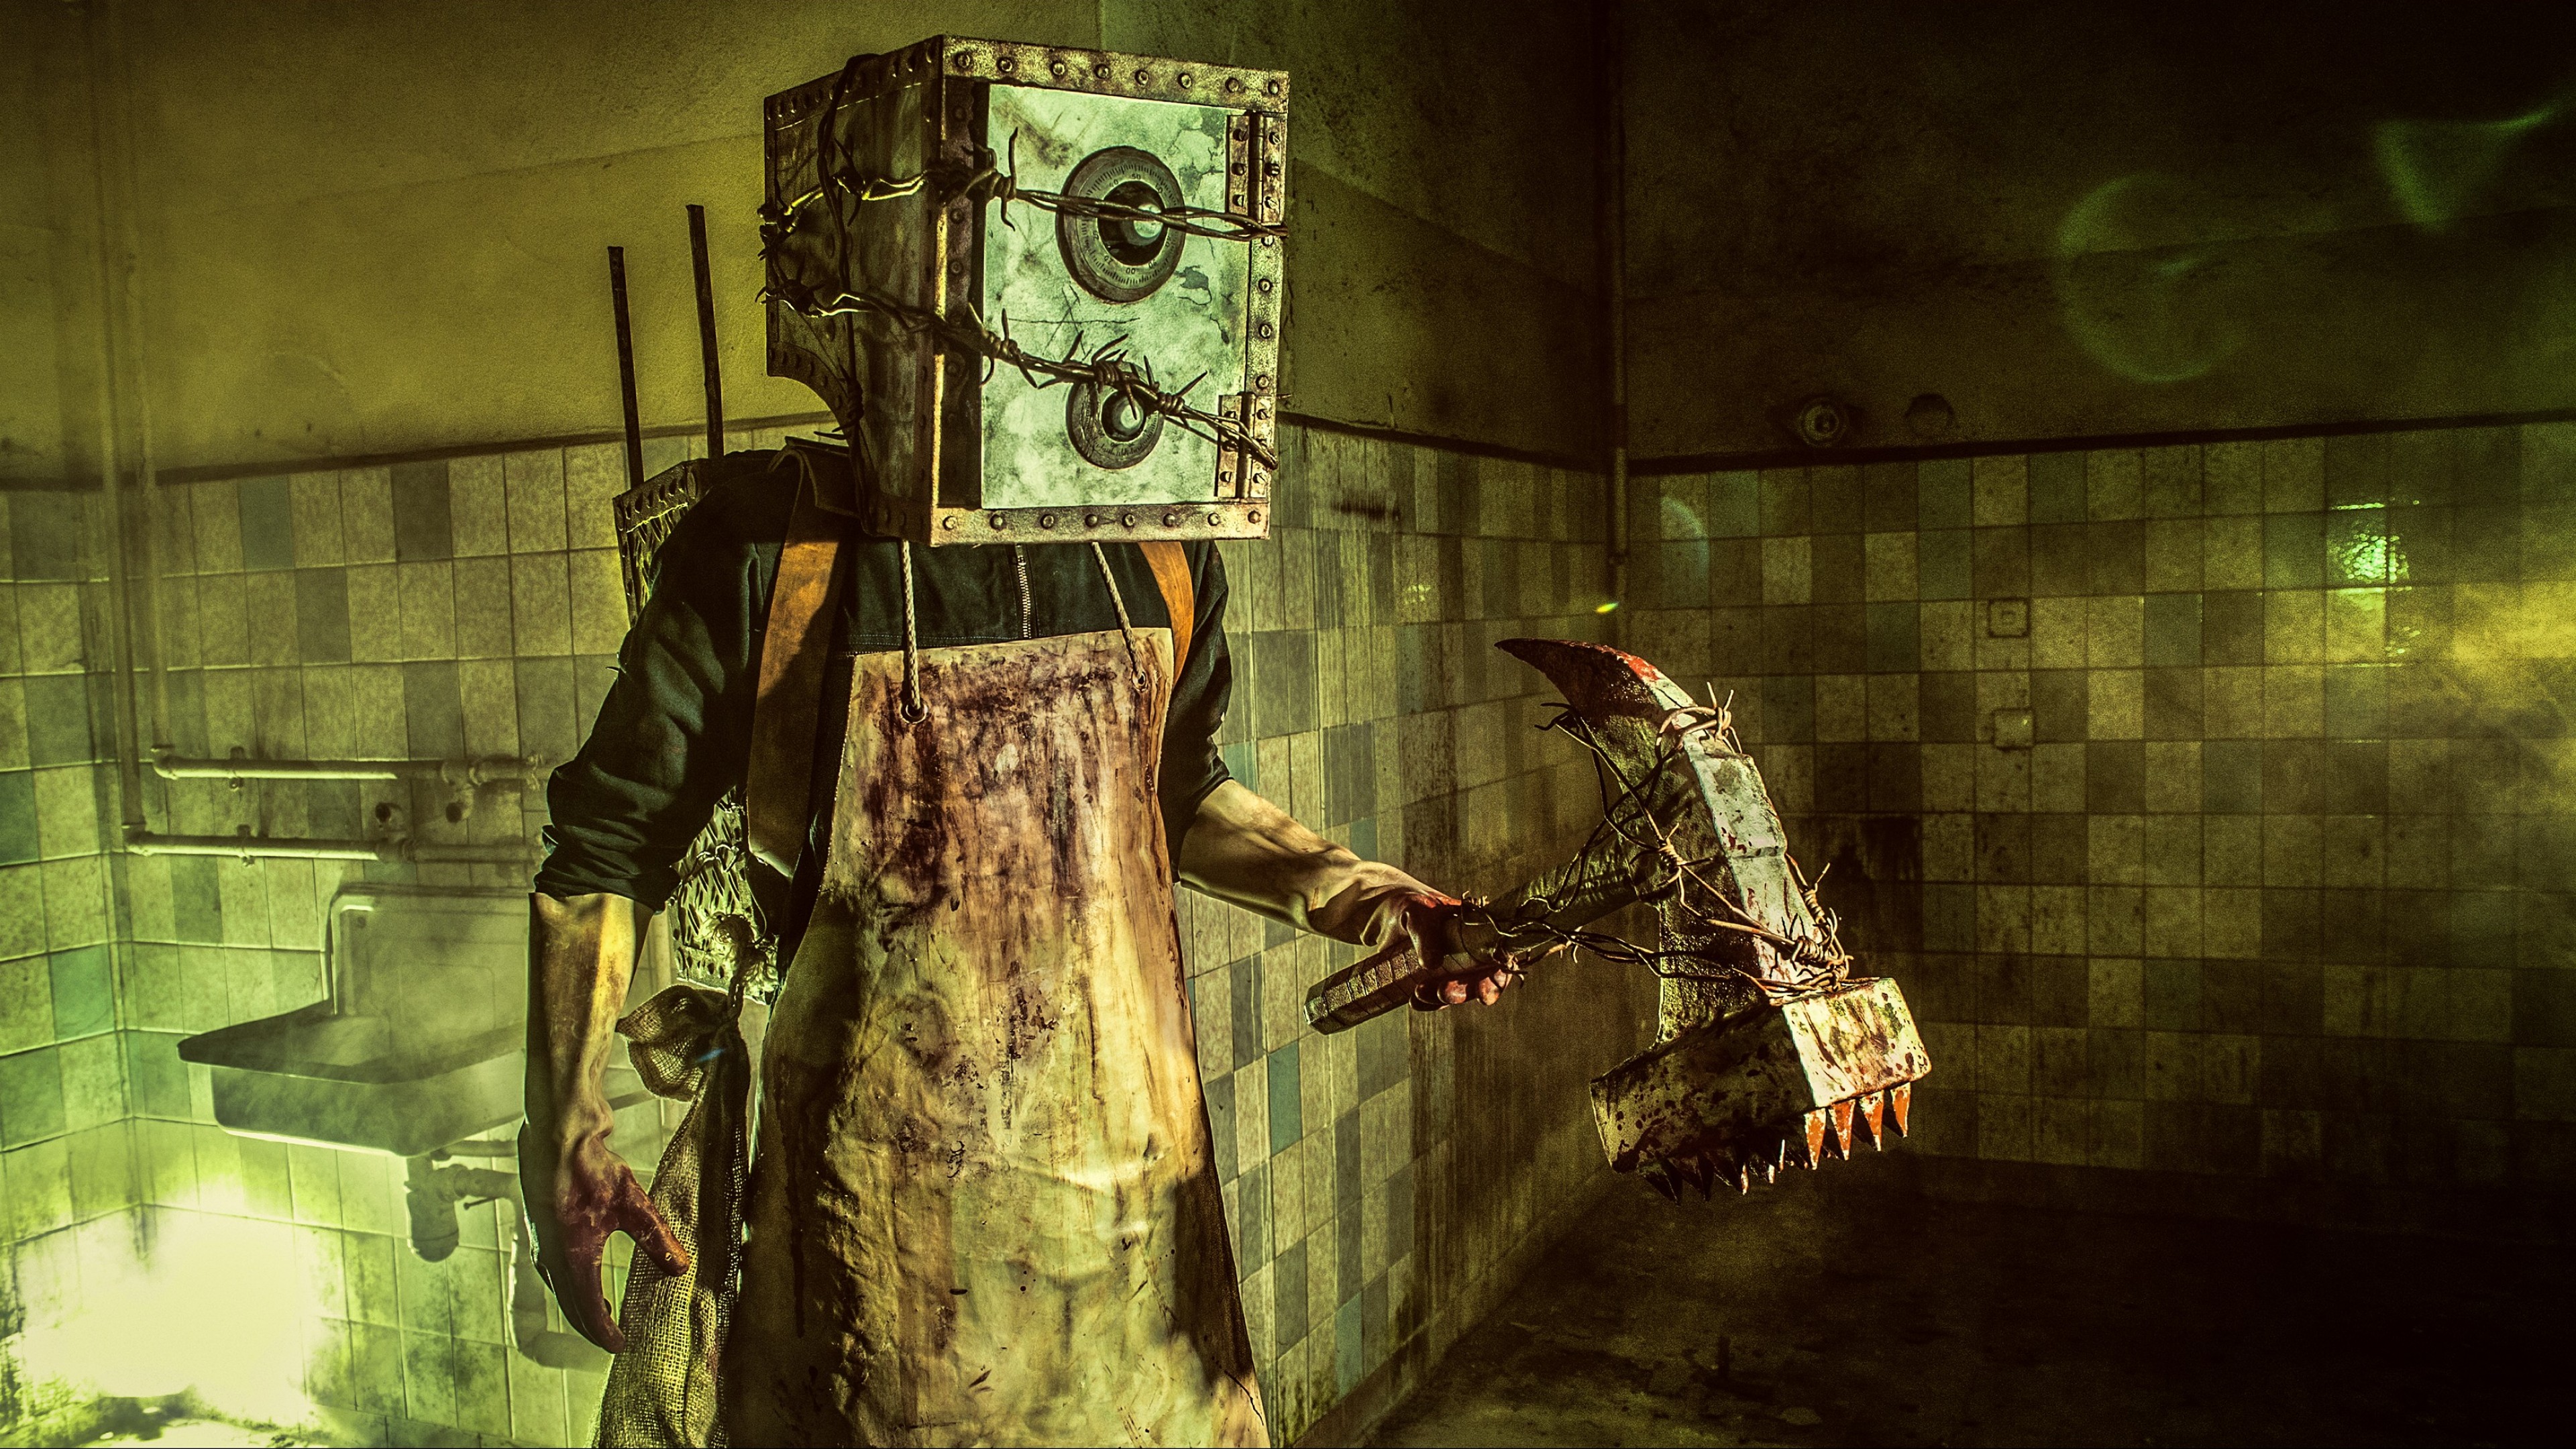 The Evil Within Wallpapers